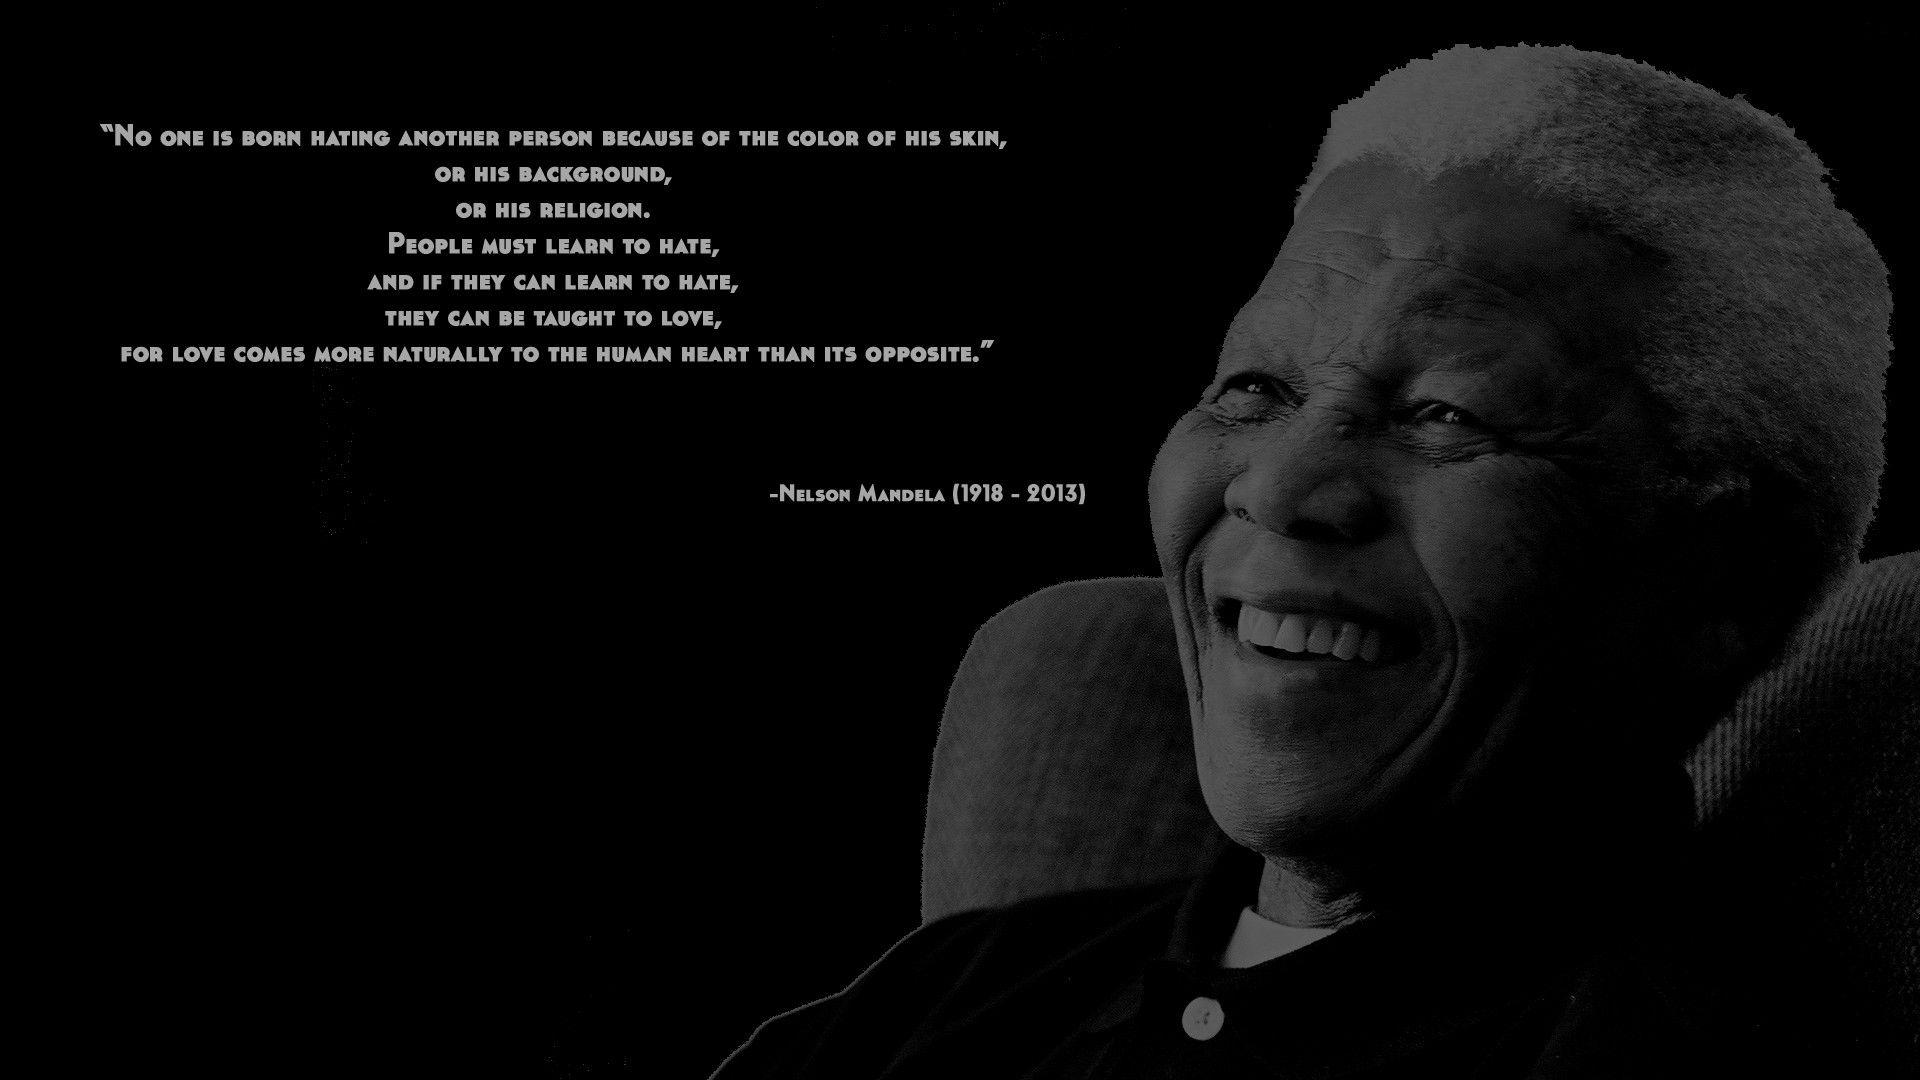 Simple Wallpaper I made in honor of Mr. Mandela, with my favorite